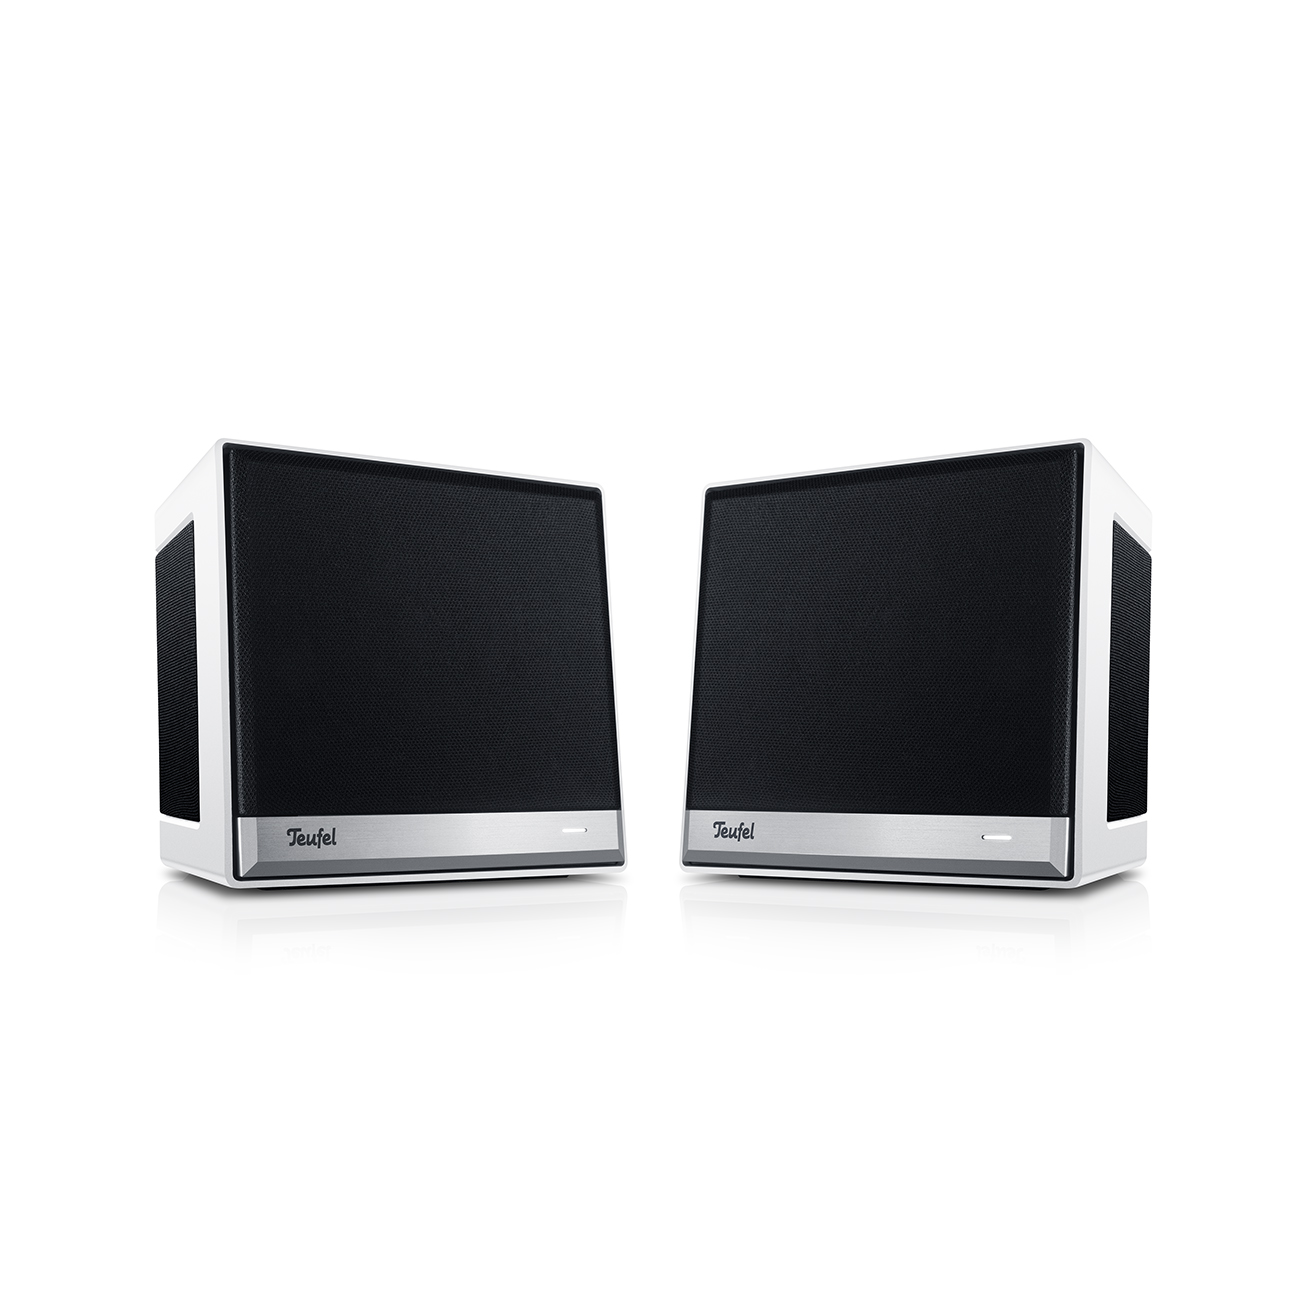 TEUFEL ONE S Stereo-Set